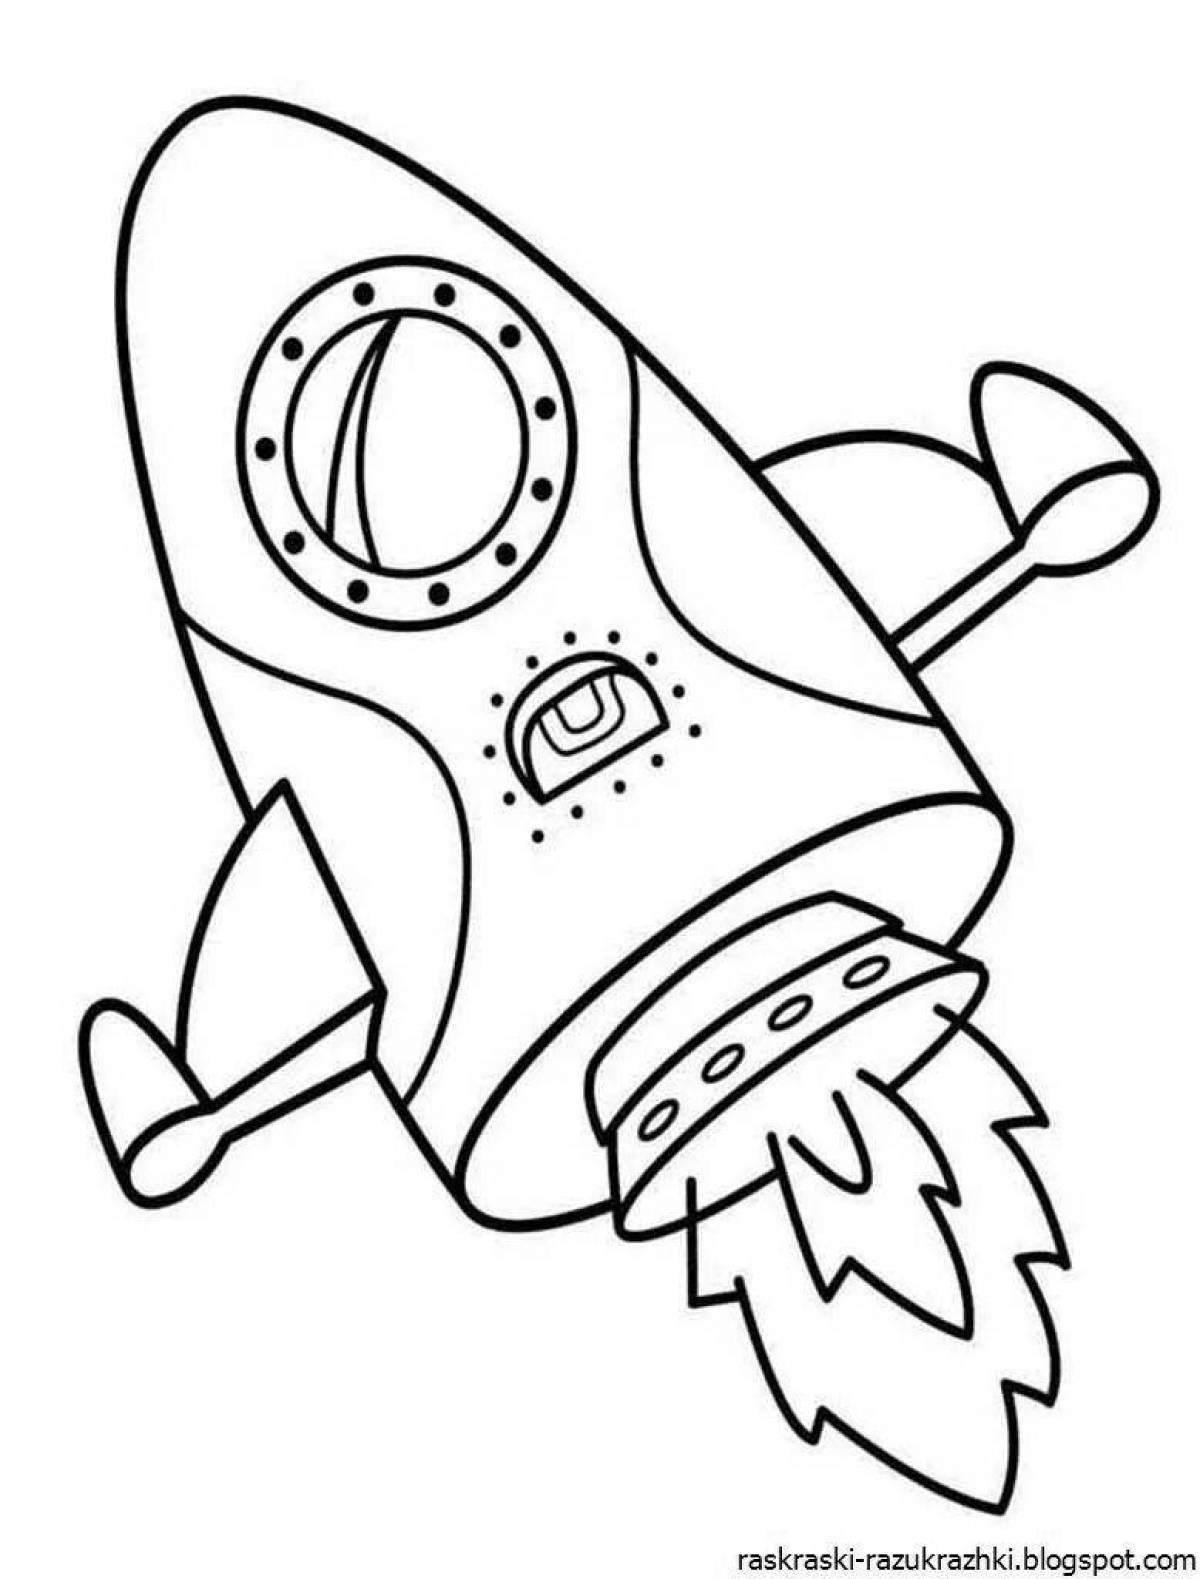 Animated drawing of a rocket